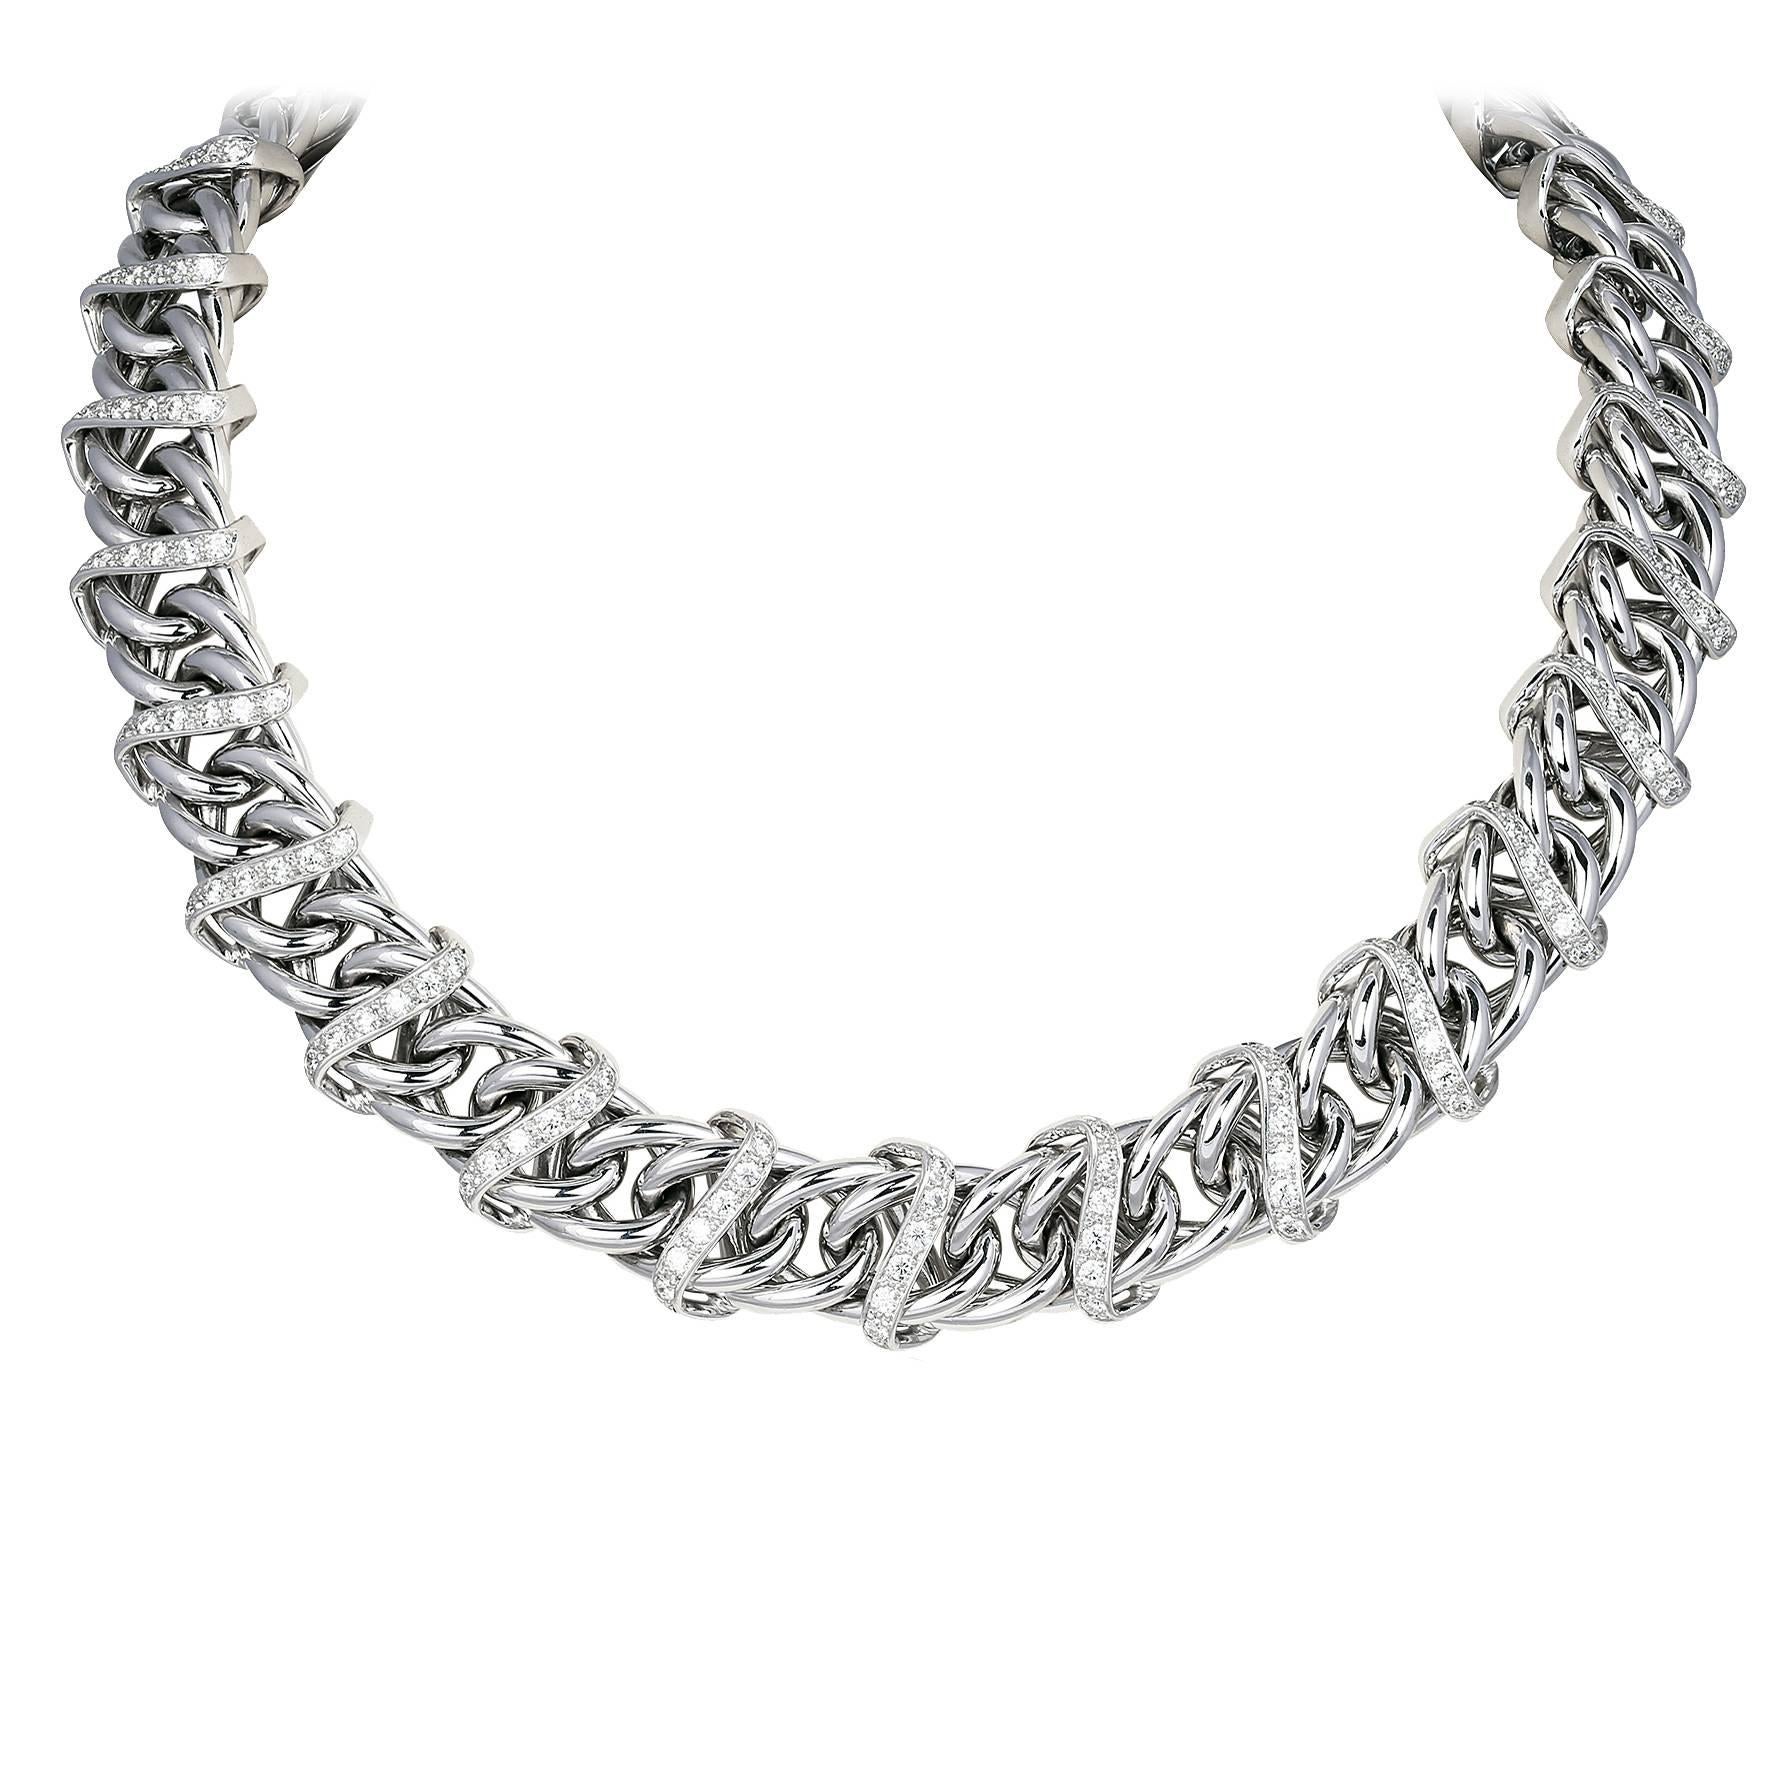 6.04 Carats Diamonds Gold Collar Necklace For Sale